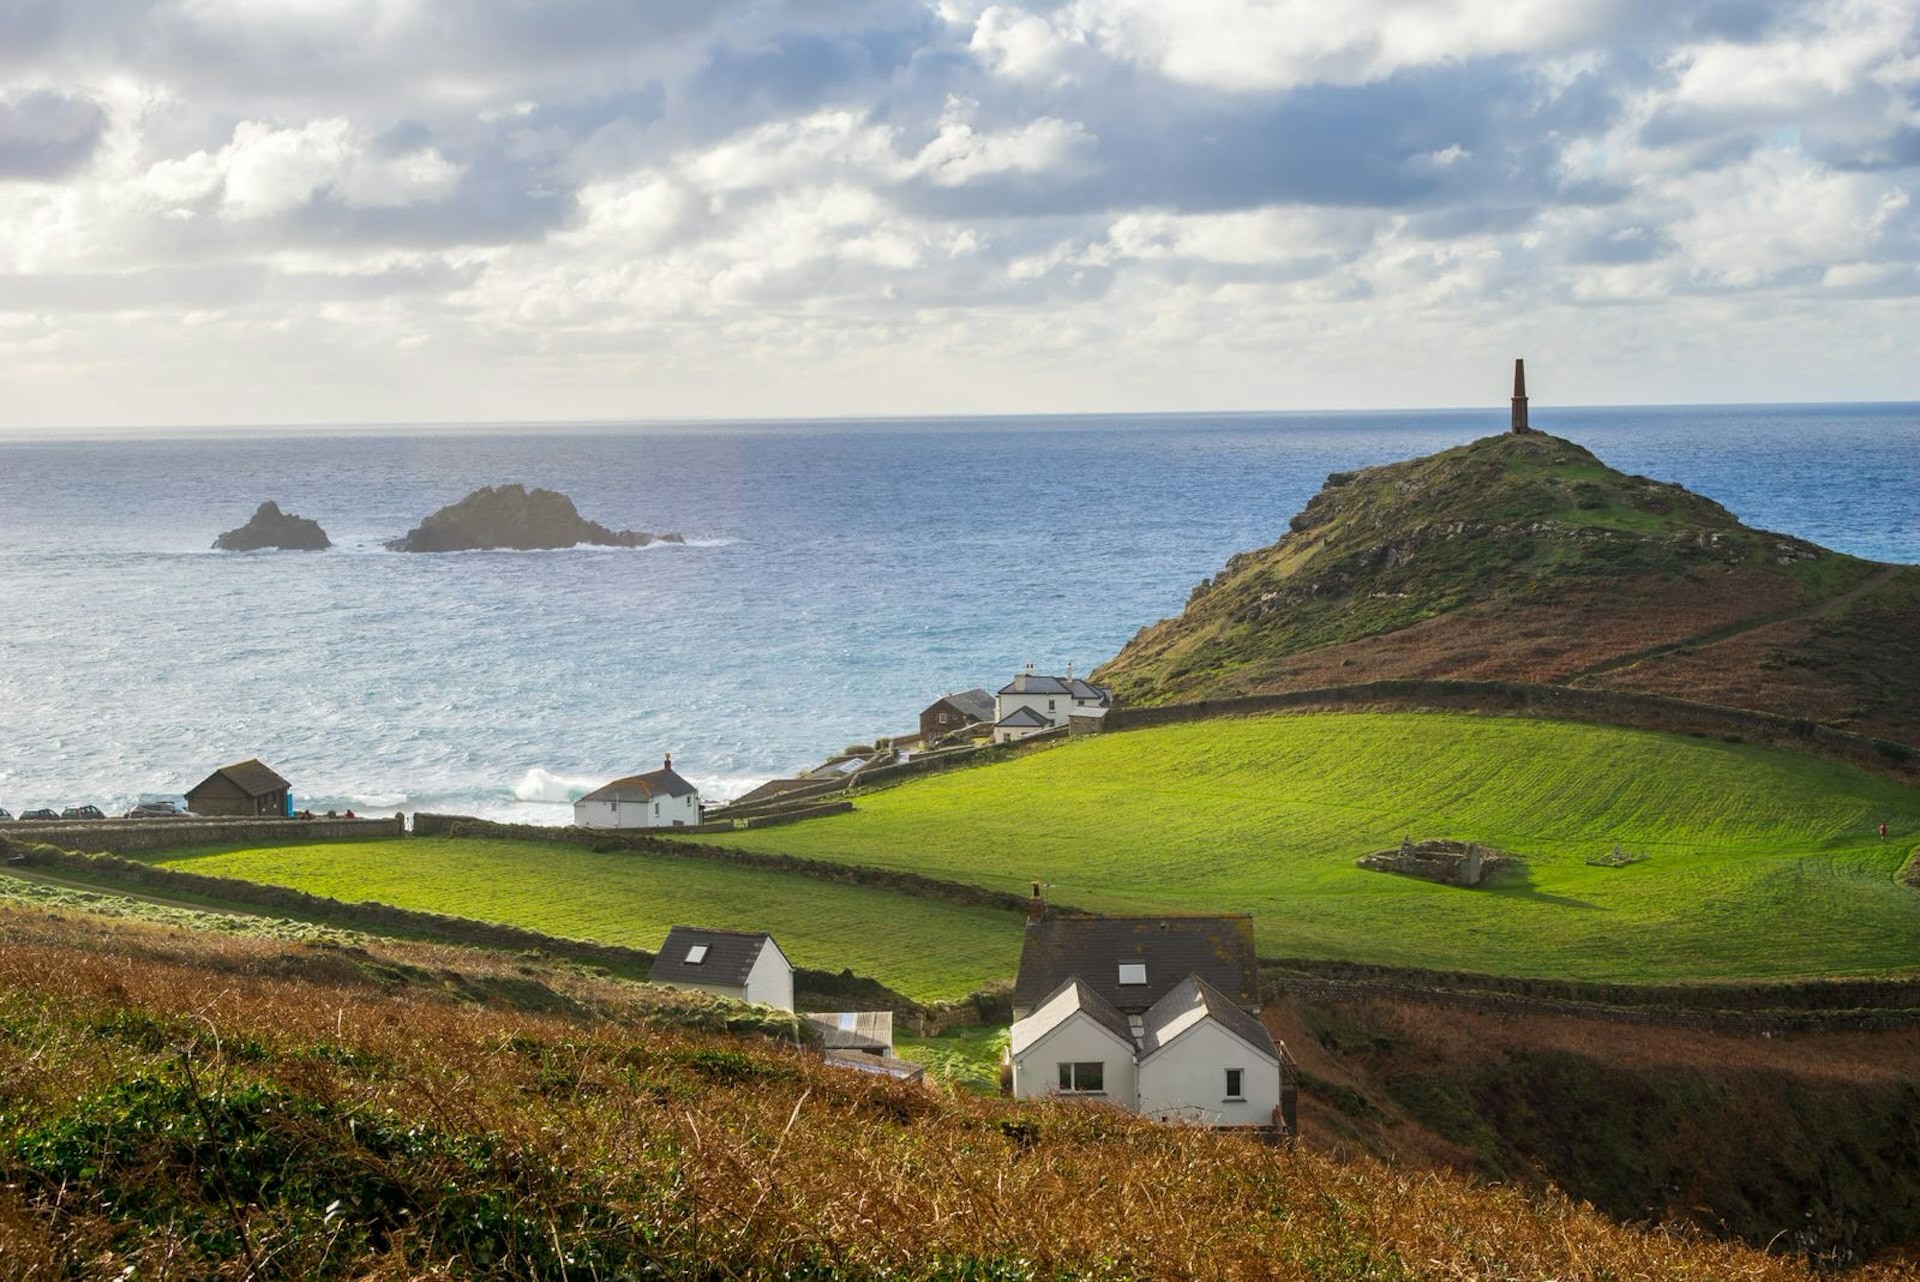 A few miles southwest of Botallack, Cape Cornwall is topped by an abandoned chimney stack © Ian Woolcock/Shutterstock 